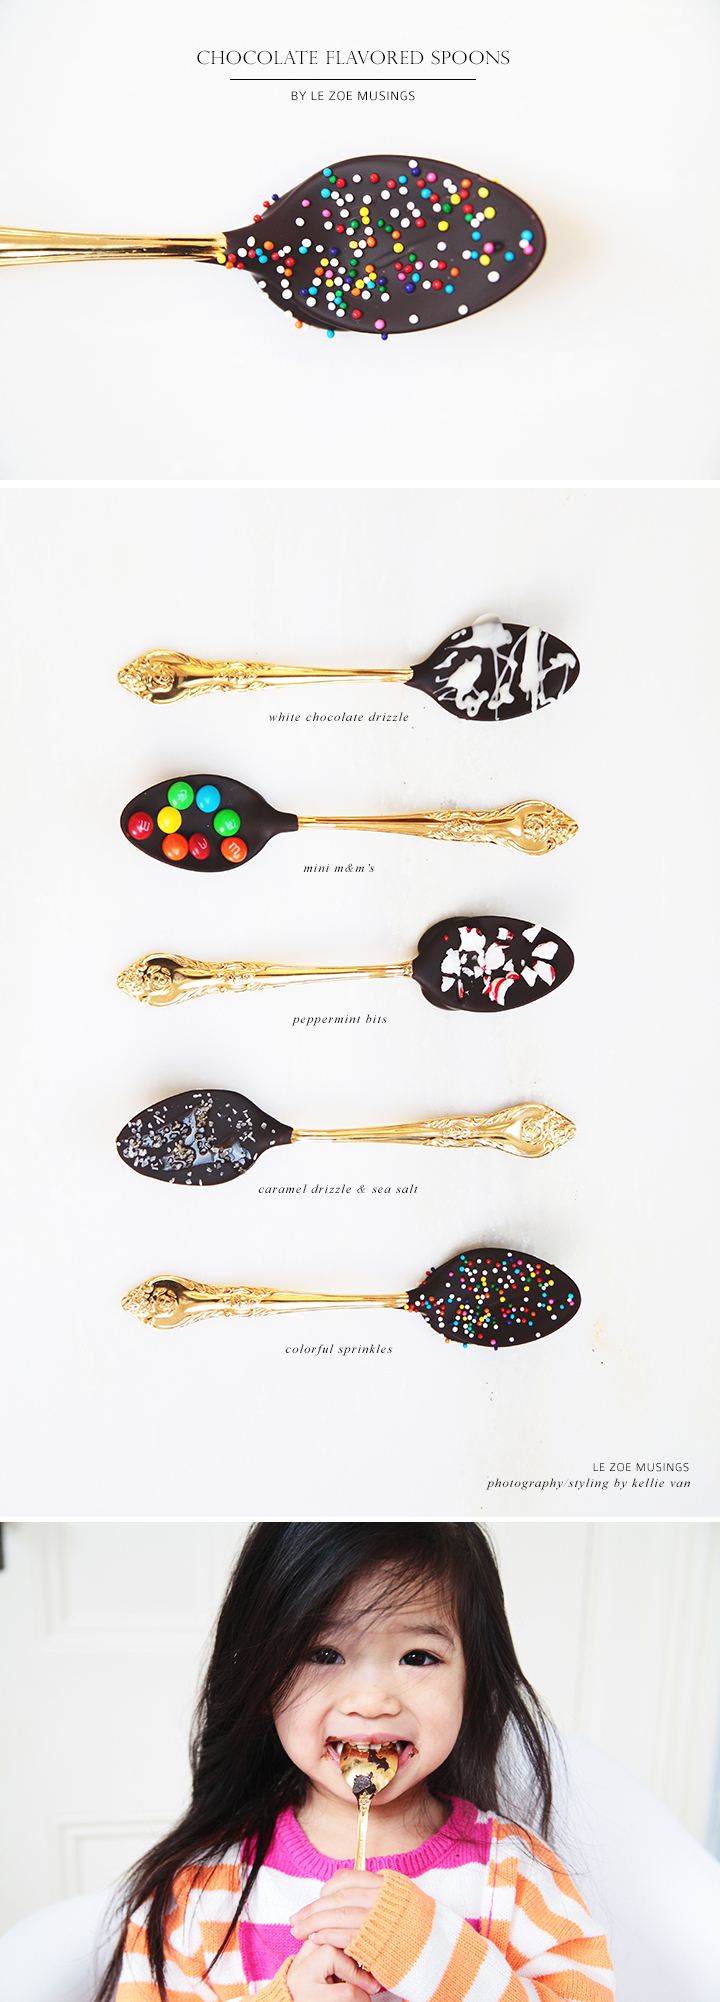 chocolate-flavored-spoon-by-le-zoe-musings_2 (1)